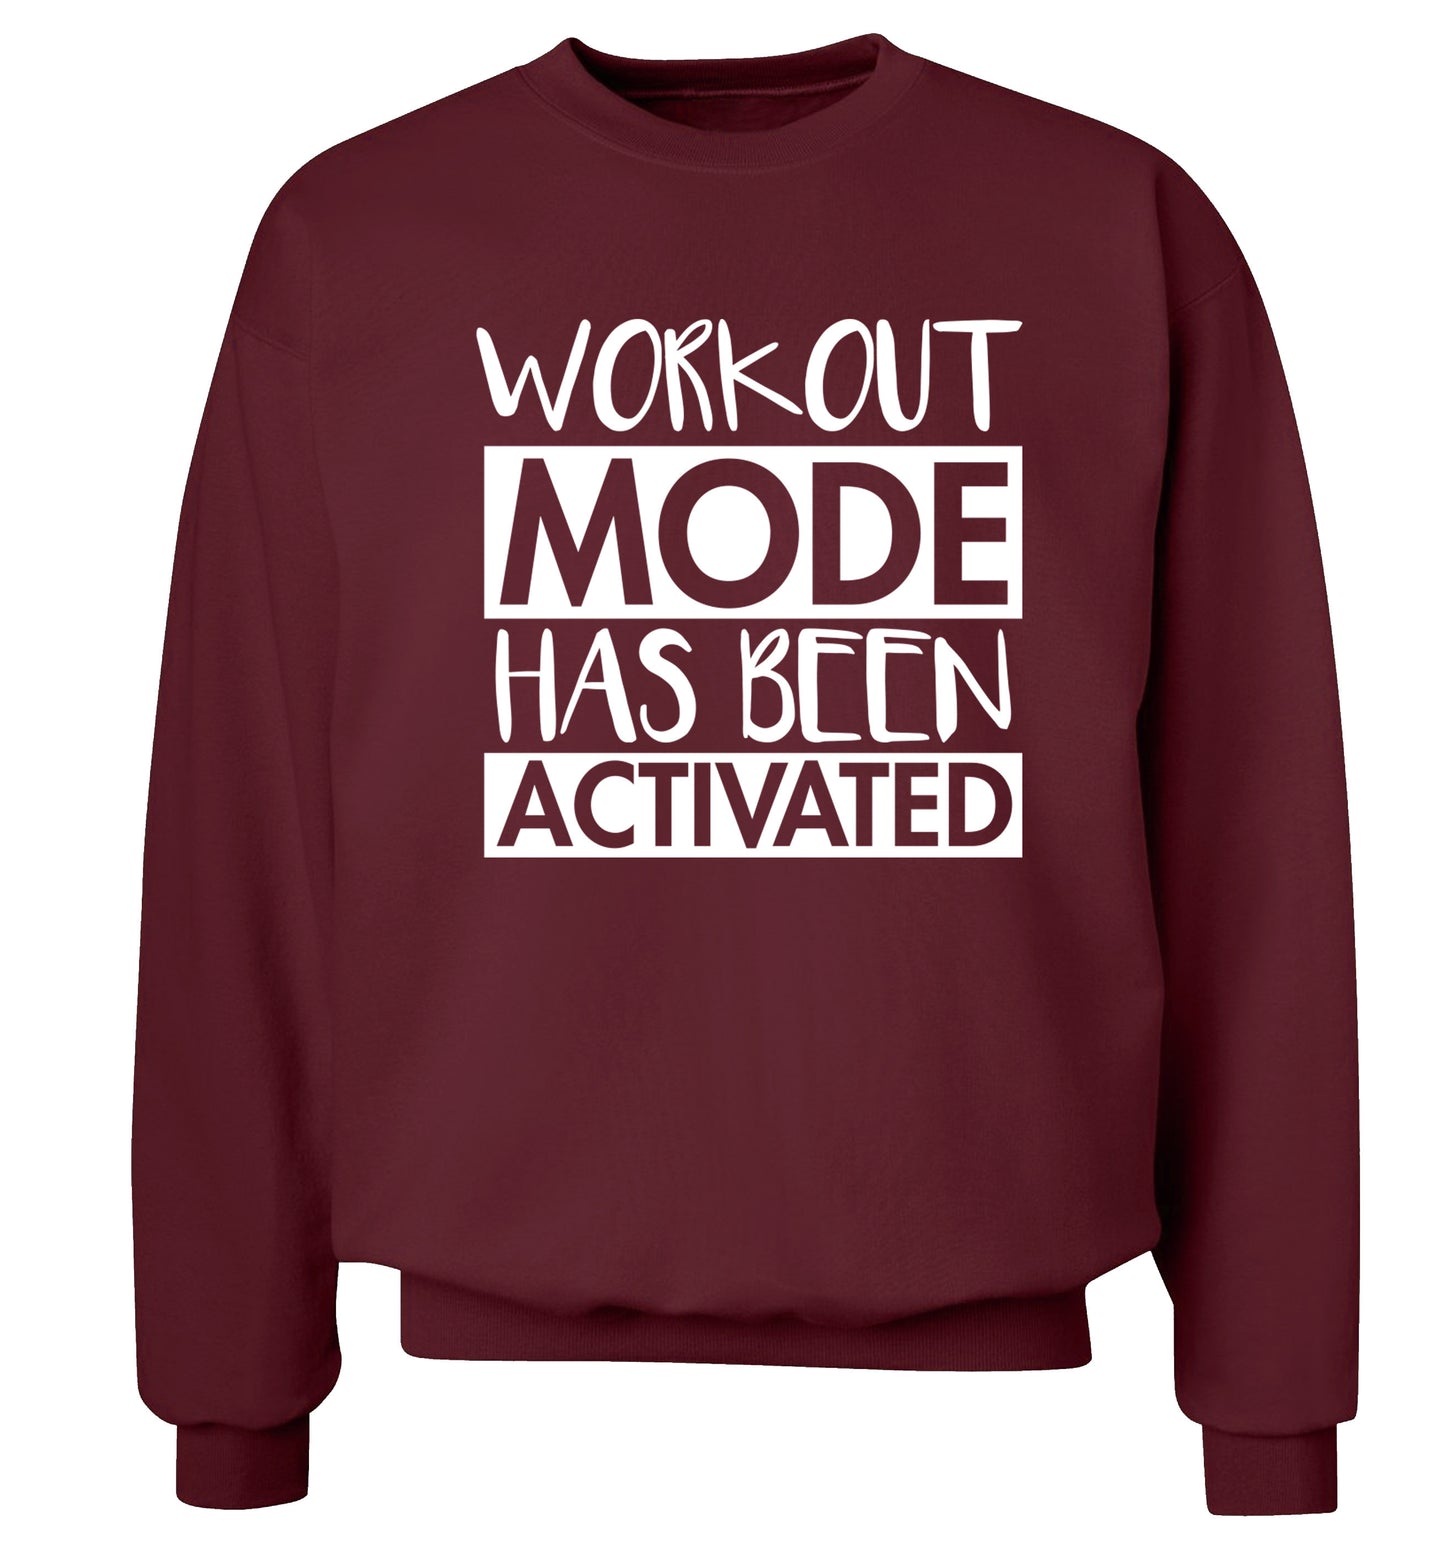 Workout mode has been activated Adult's unisex maroon Sweater 2XL